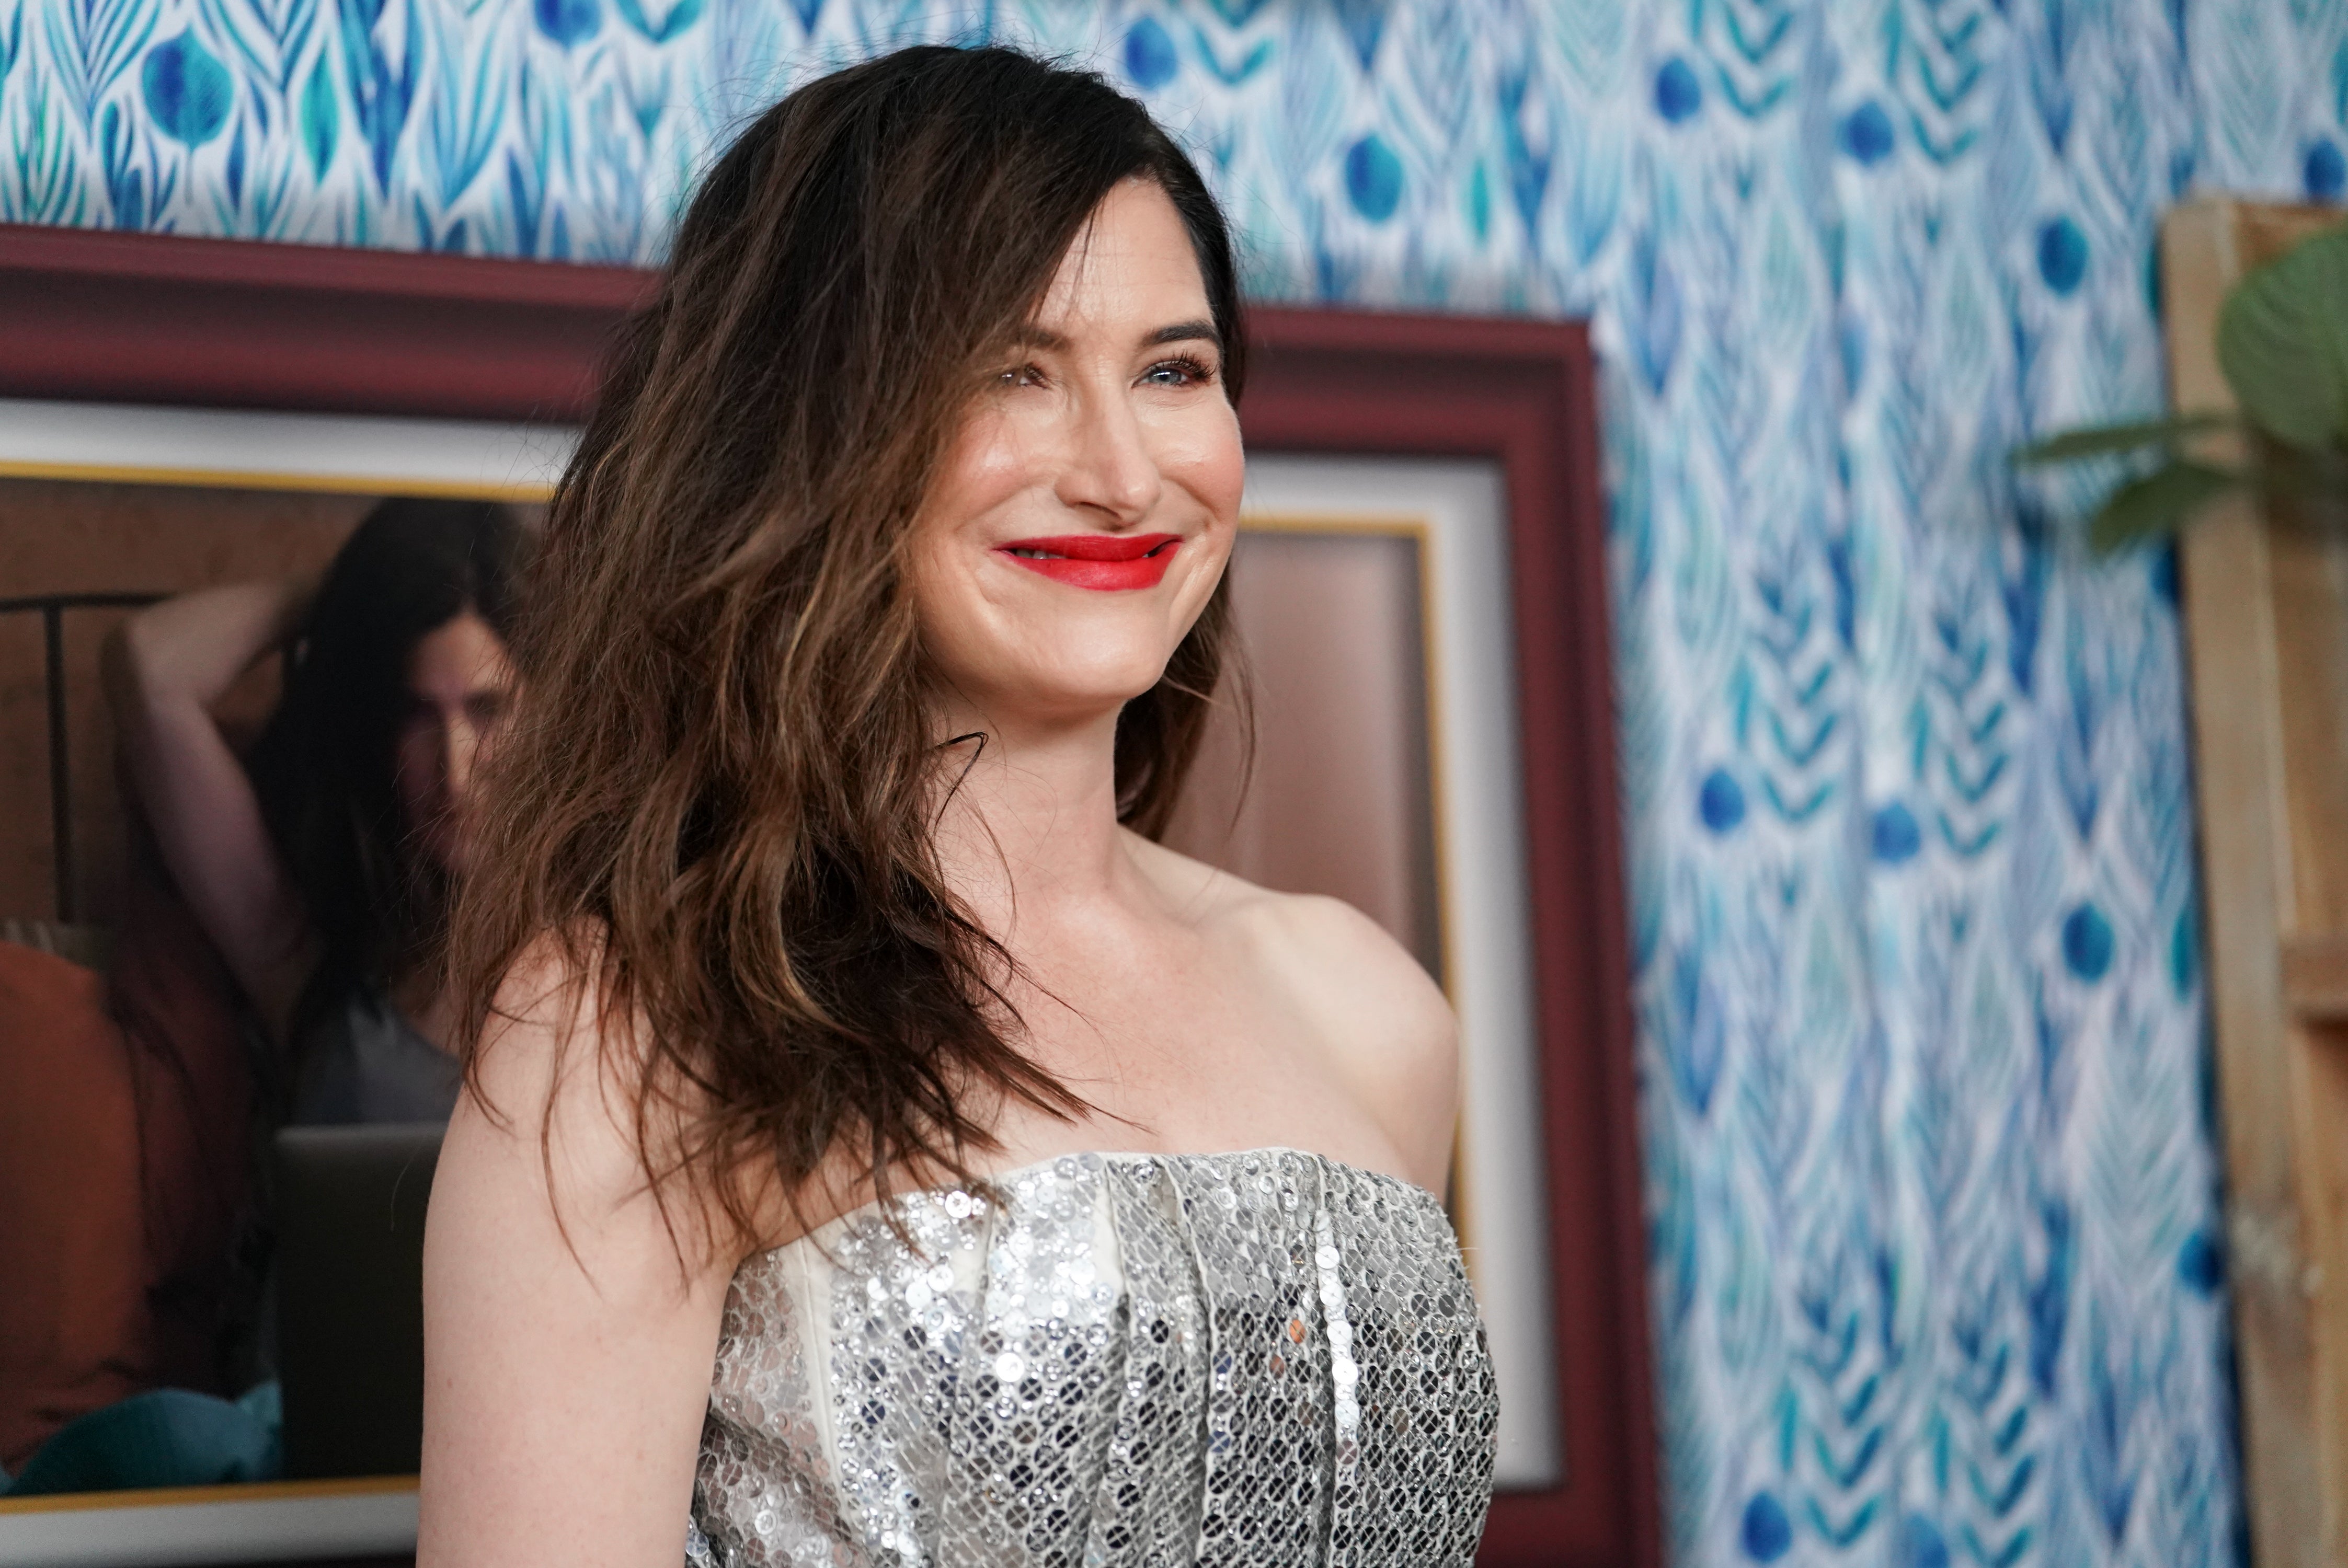 Kathryn Hahn is the most recent addition to the sequel